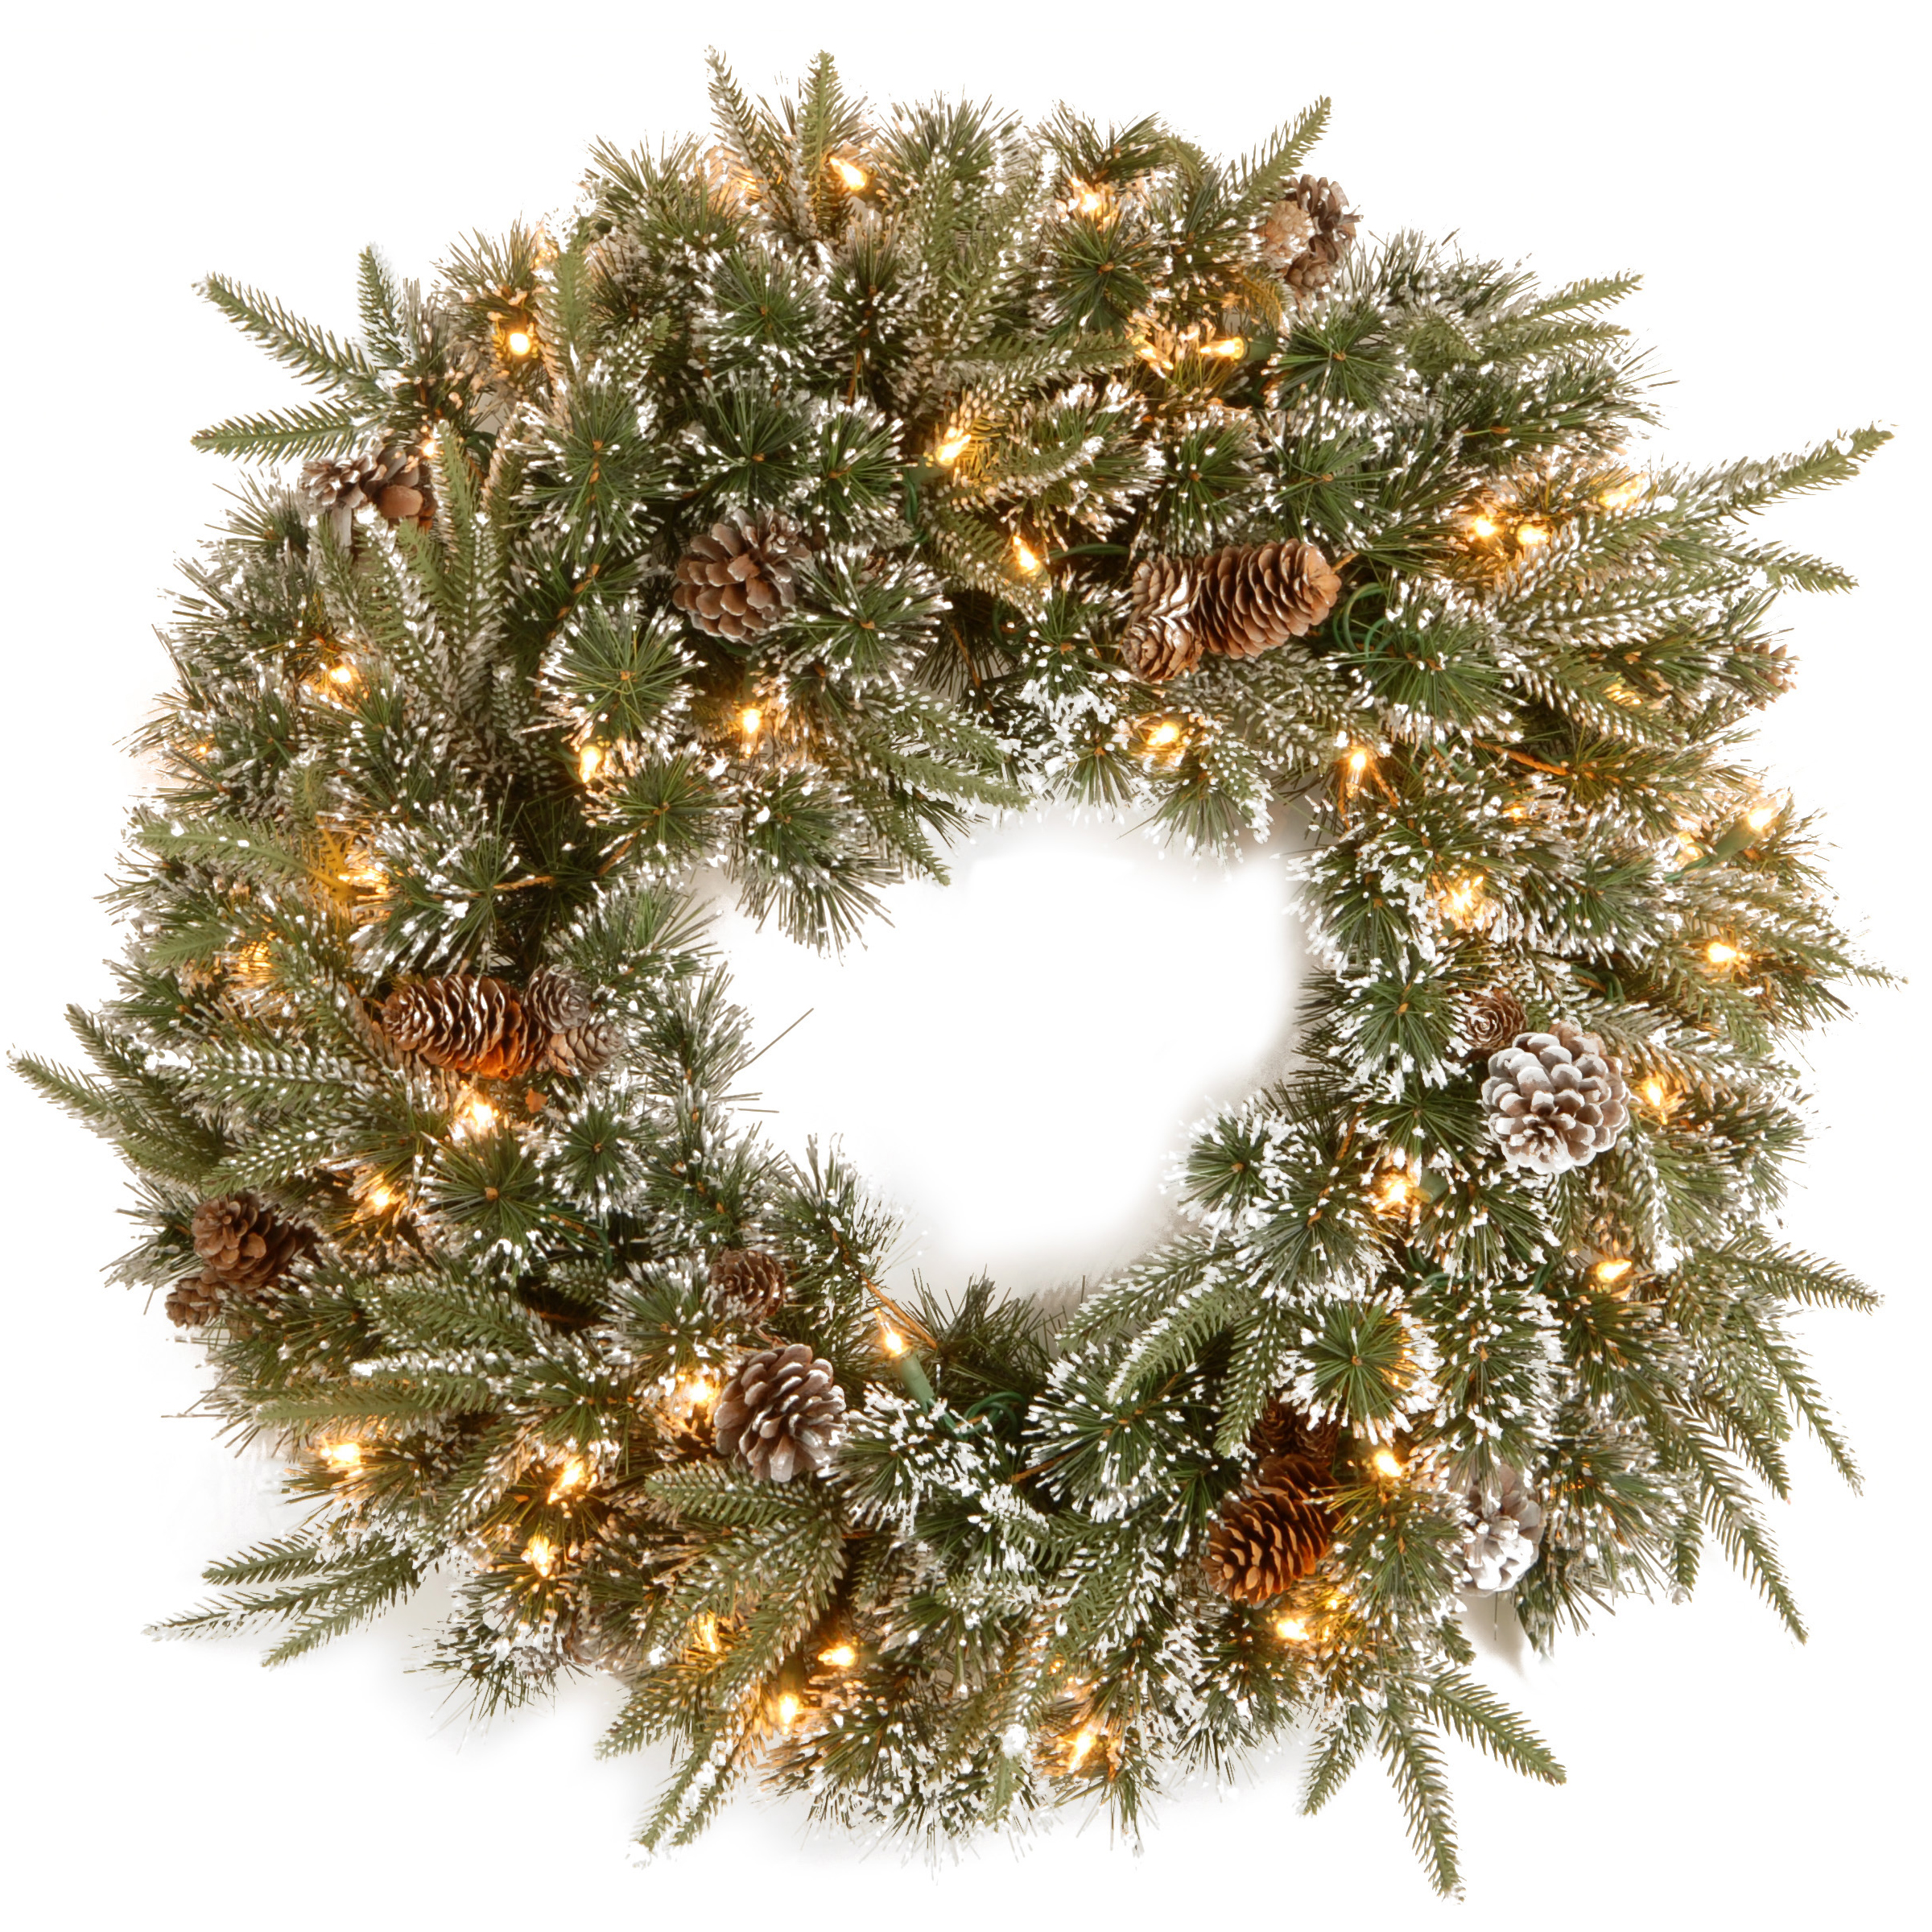 National Tree Company Pre-Lit 'Feel Real' Artificial Christmas Wreath, Green, Liberty Pine, White Lights, Decorated with Frosted Branches, Pine Cones, Christmas Collection, 24 Inches - image 1 of 5